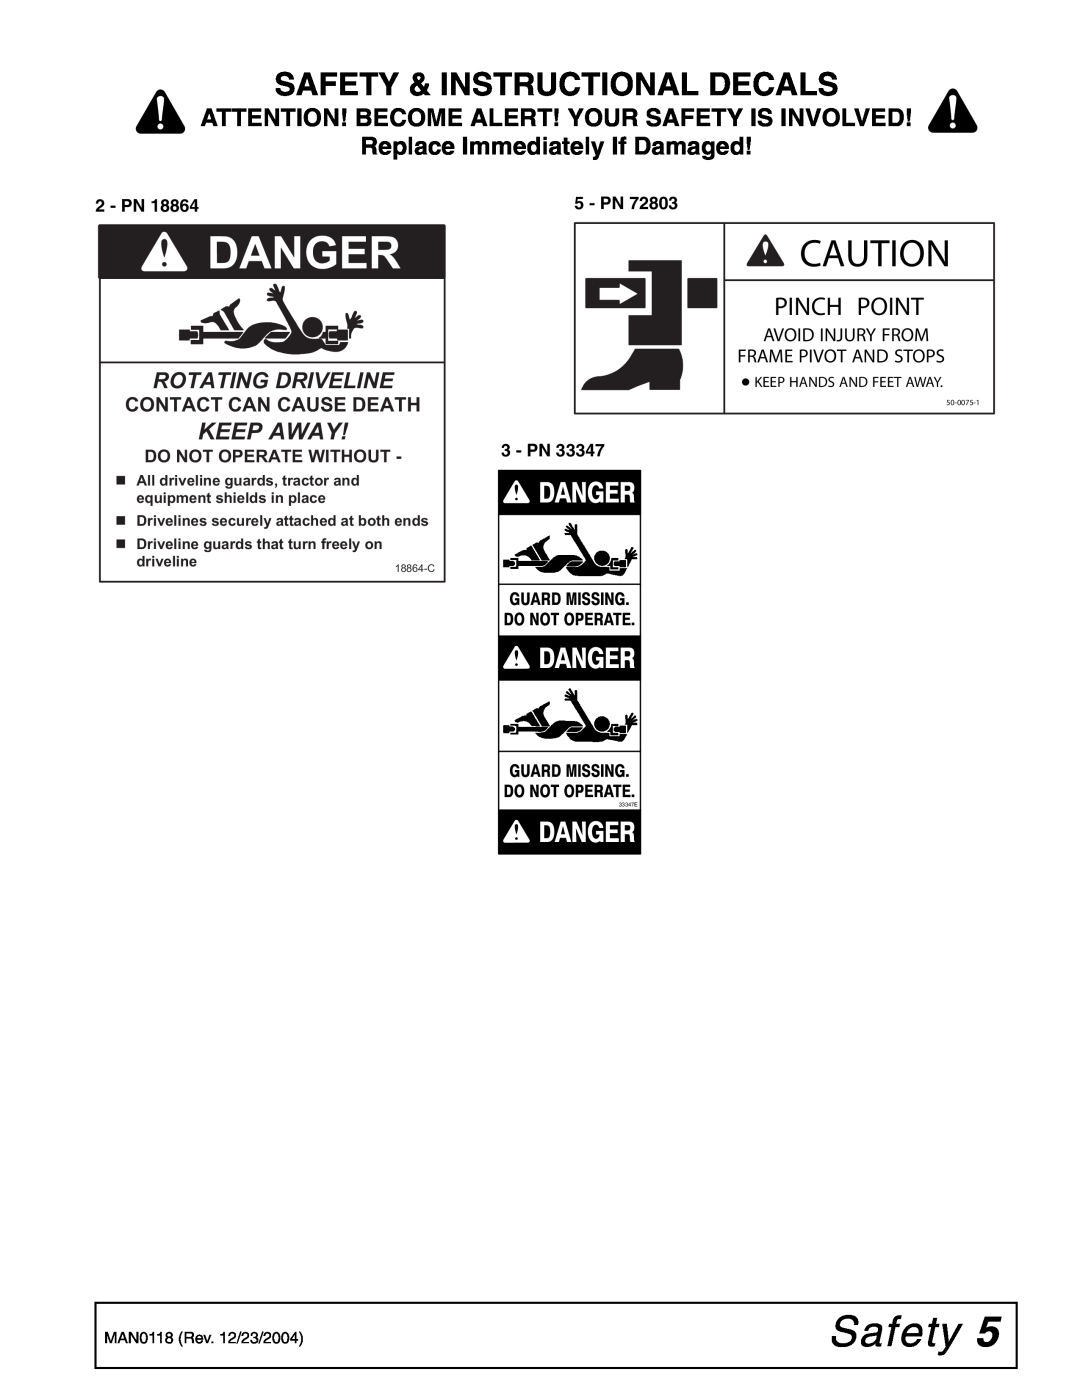 Woods Equipment FSW6000F Danger, Safety & Instructional Decals, 33347E, Replace Immediately If Damaged, Keep Away 